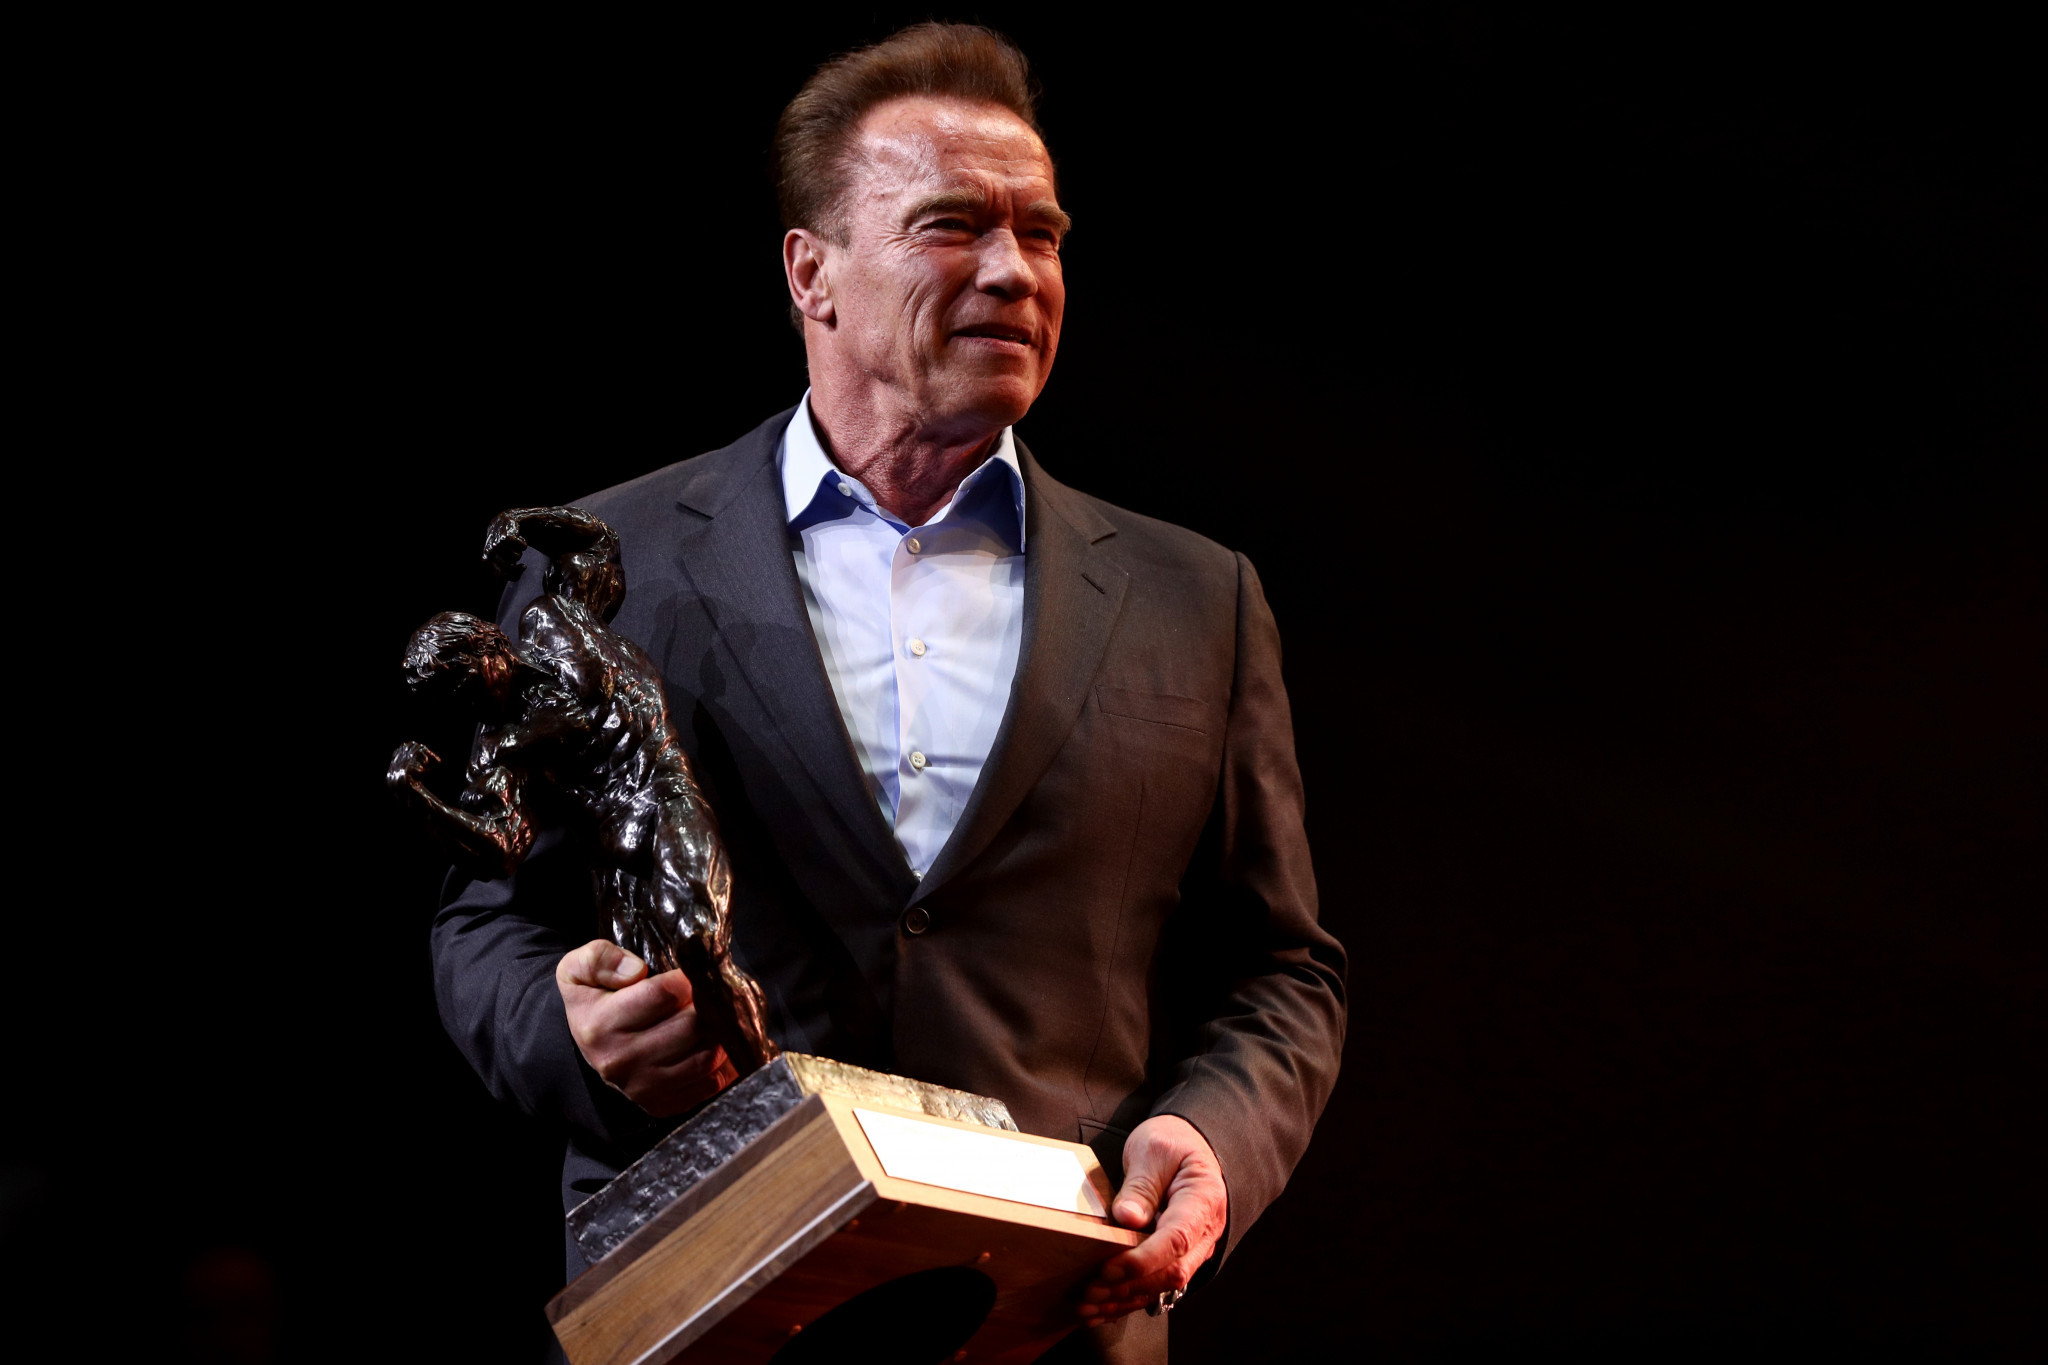 Spectators banned from The Arnold Sports Festival over coronavirus fears